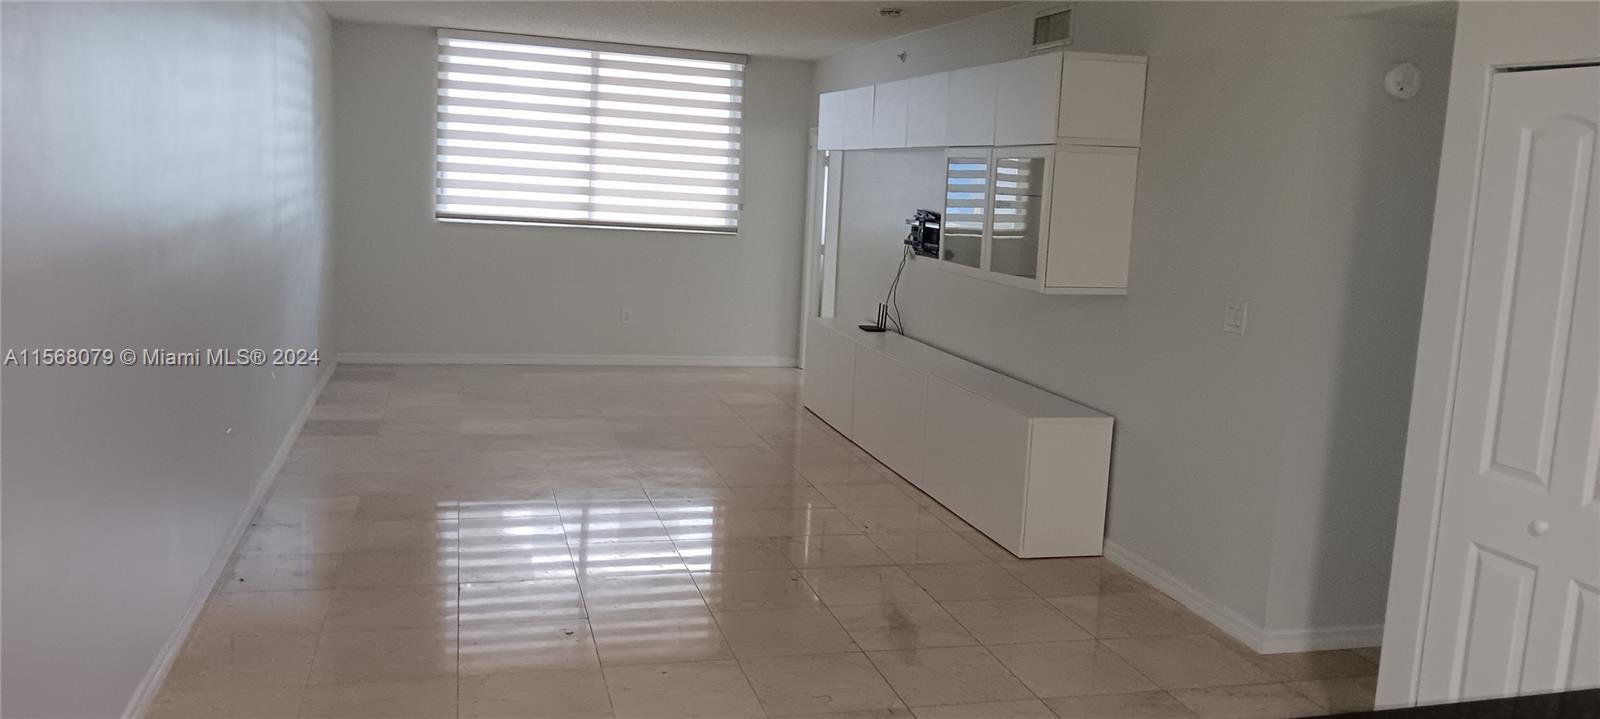 Photo of 5091 NW 7th St #115 in Miami, FL